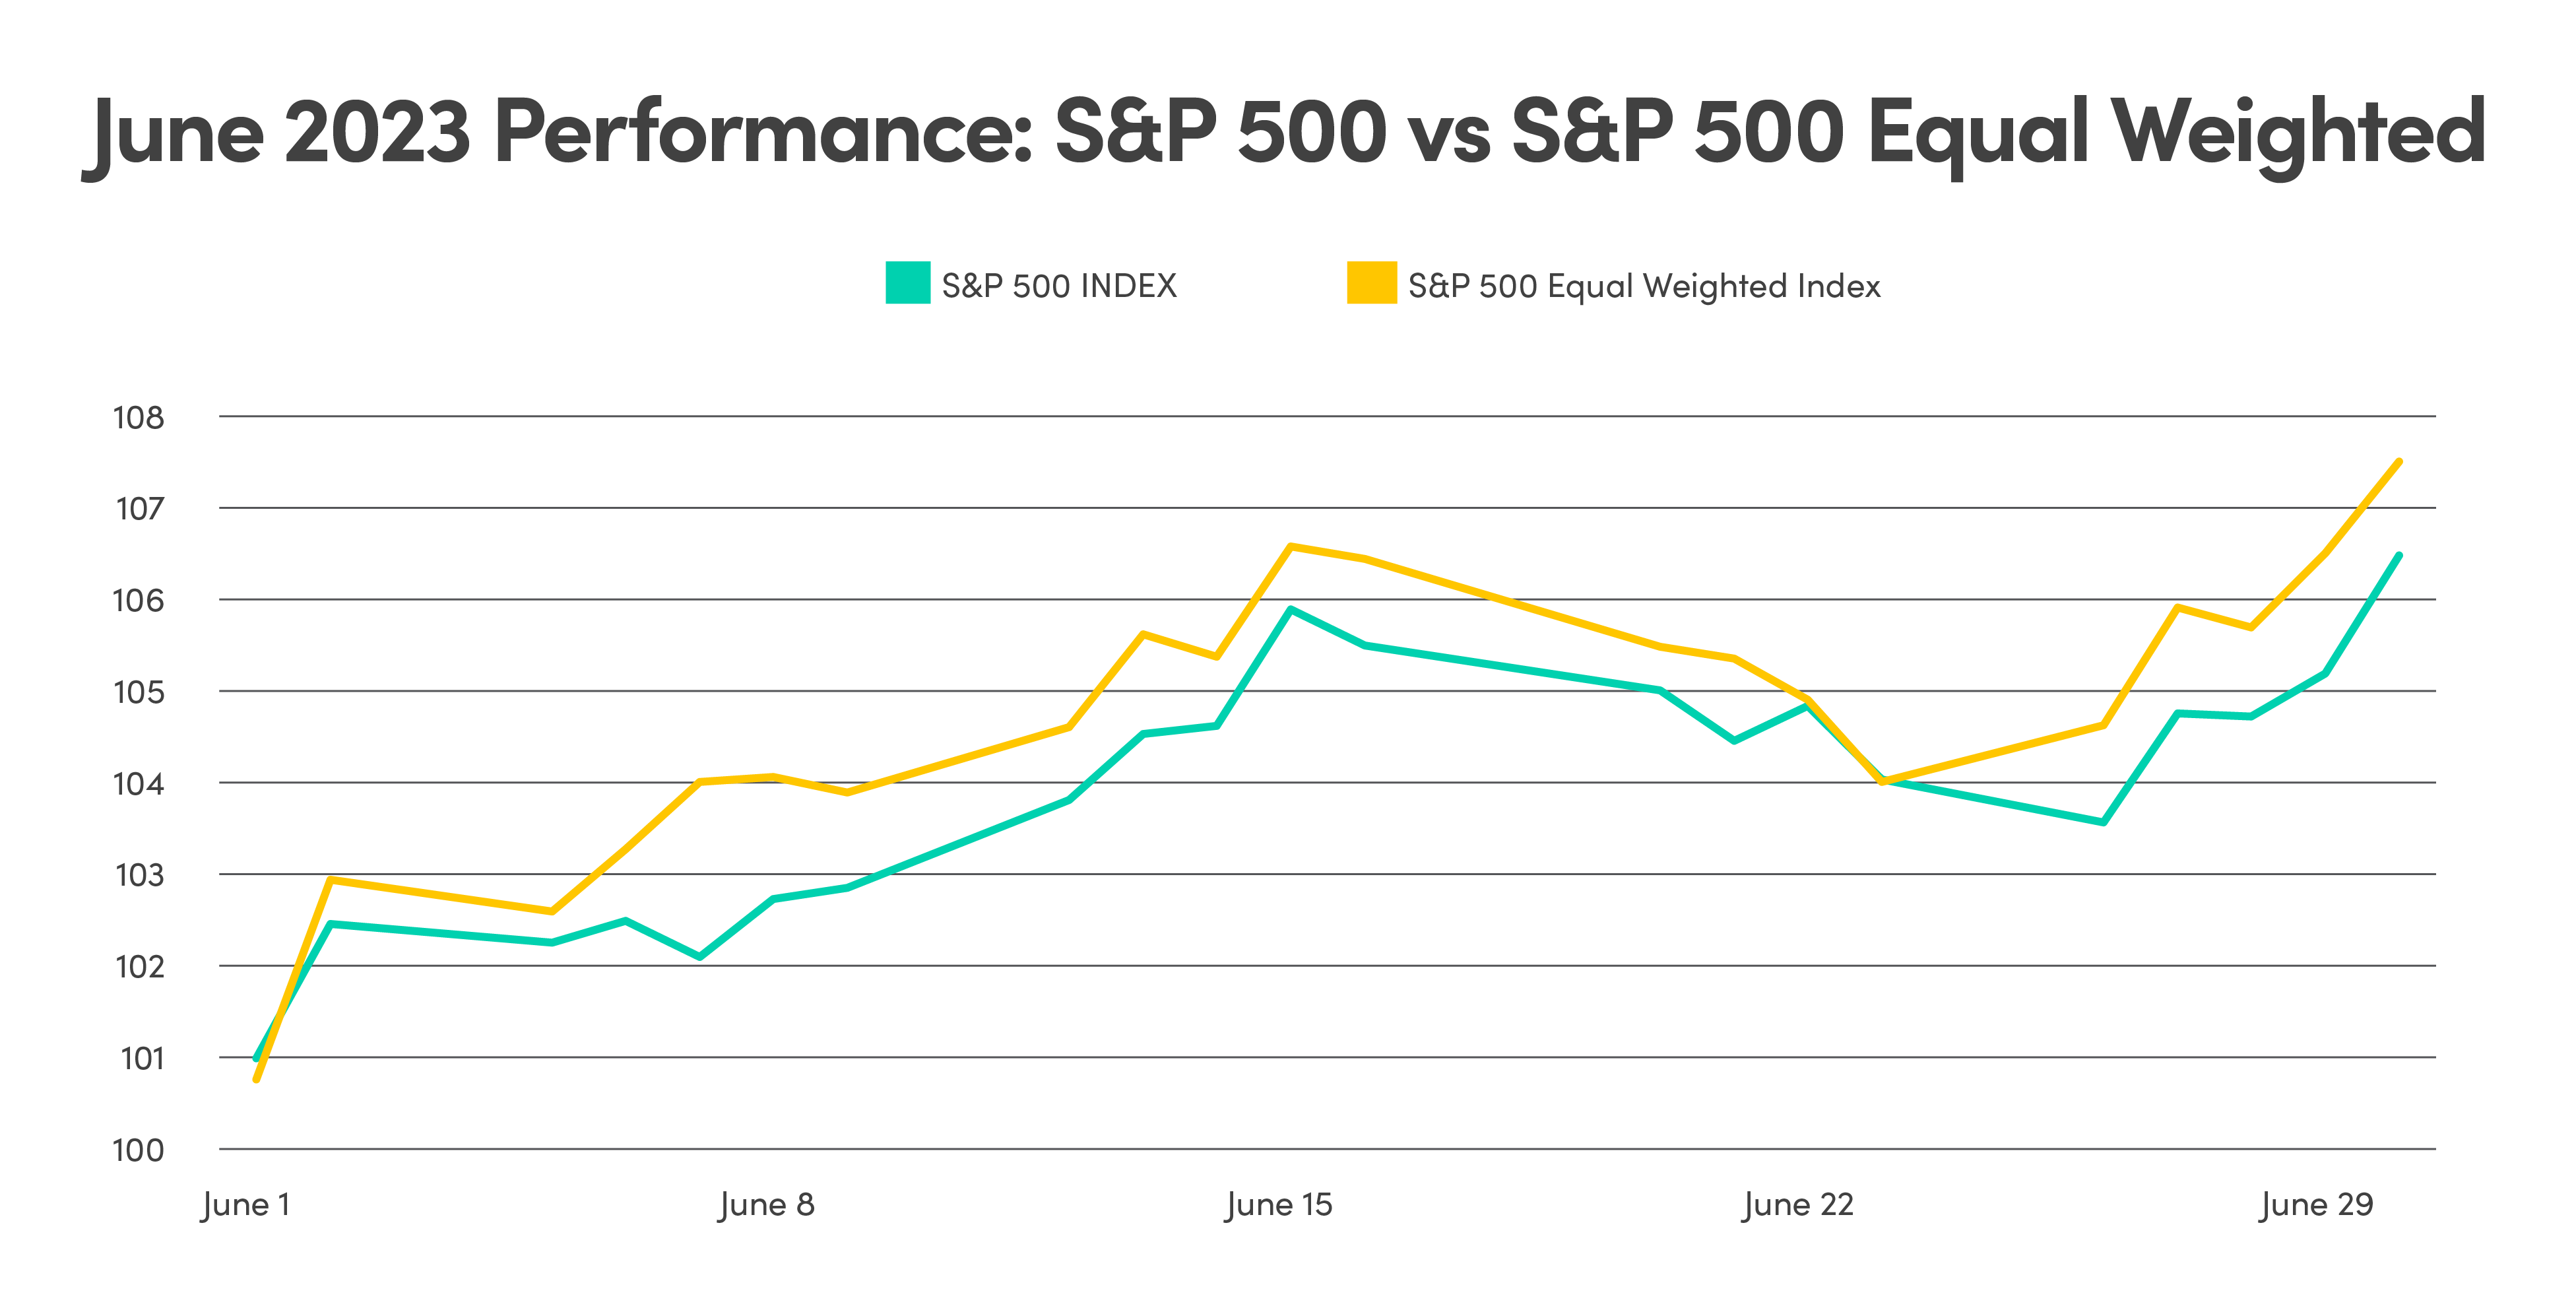 Graph comparing the June 2023 performance of the S&P 500 versus the S&P 500 Equal Weighted index